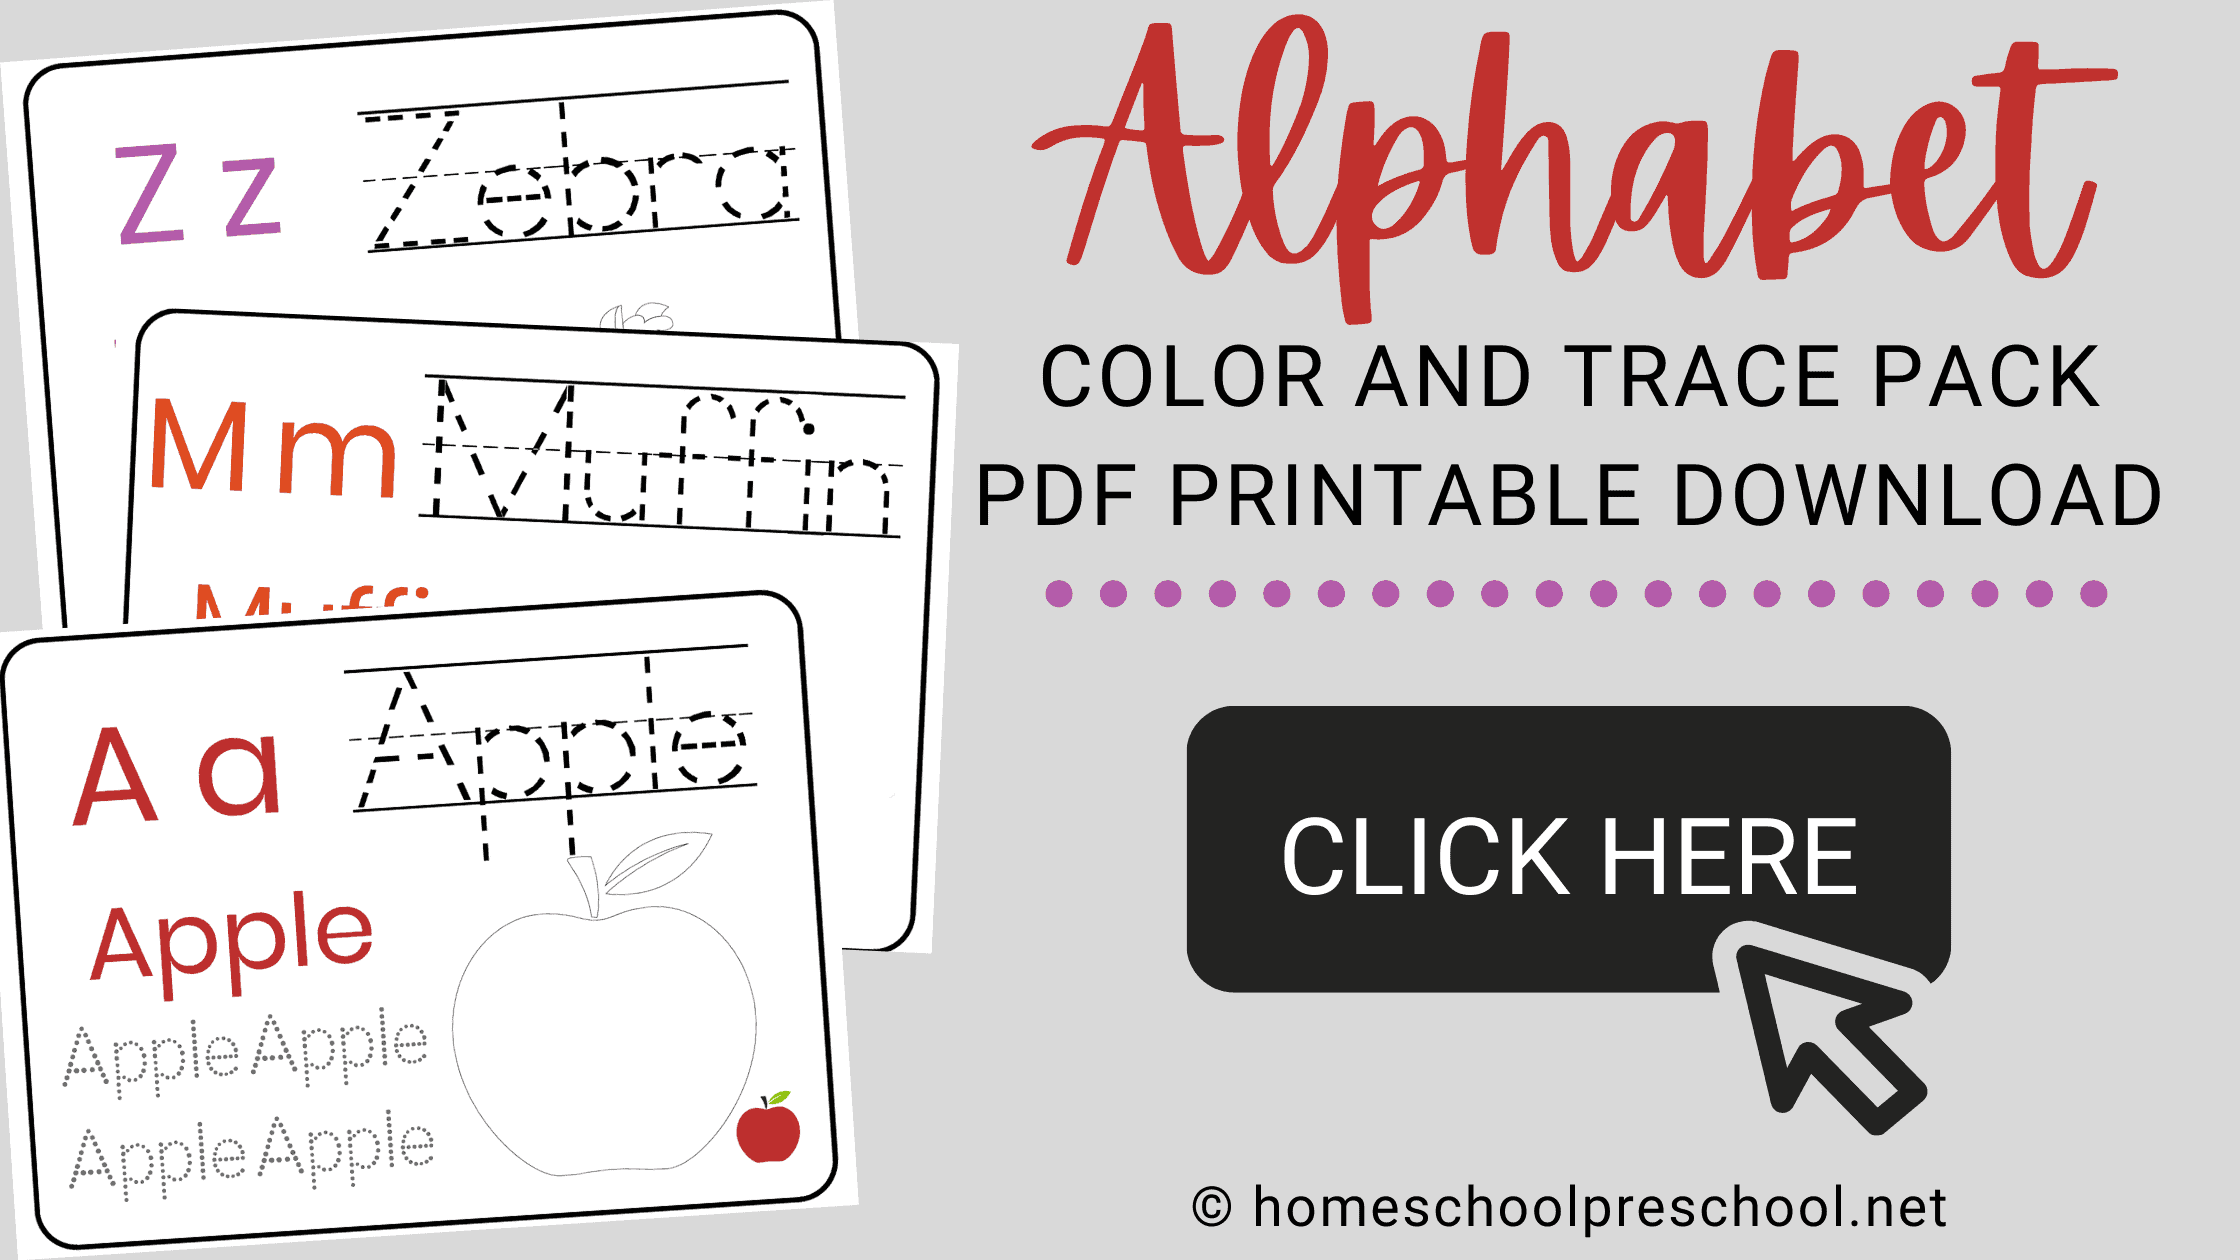 ABC-COLOR-TRACE-DOWNLOAD Tricks for Teaching the Alphabet